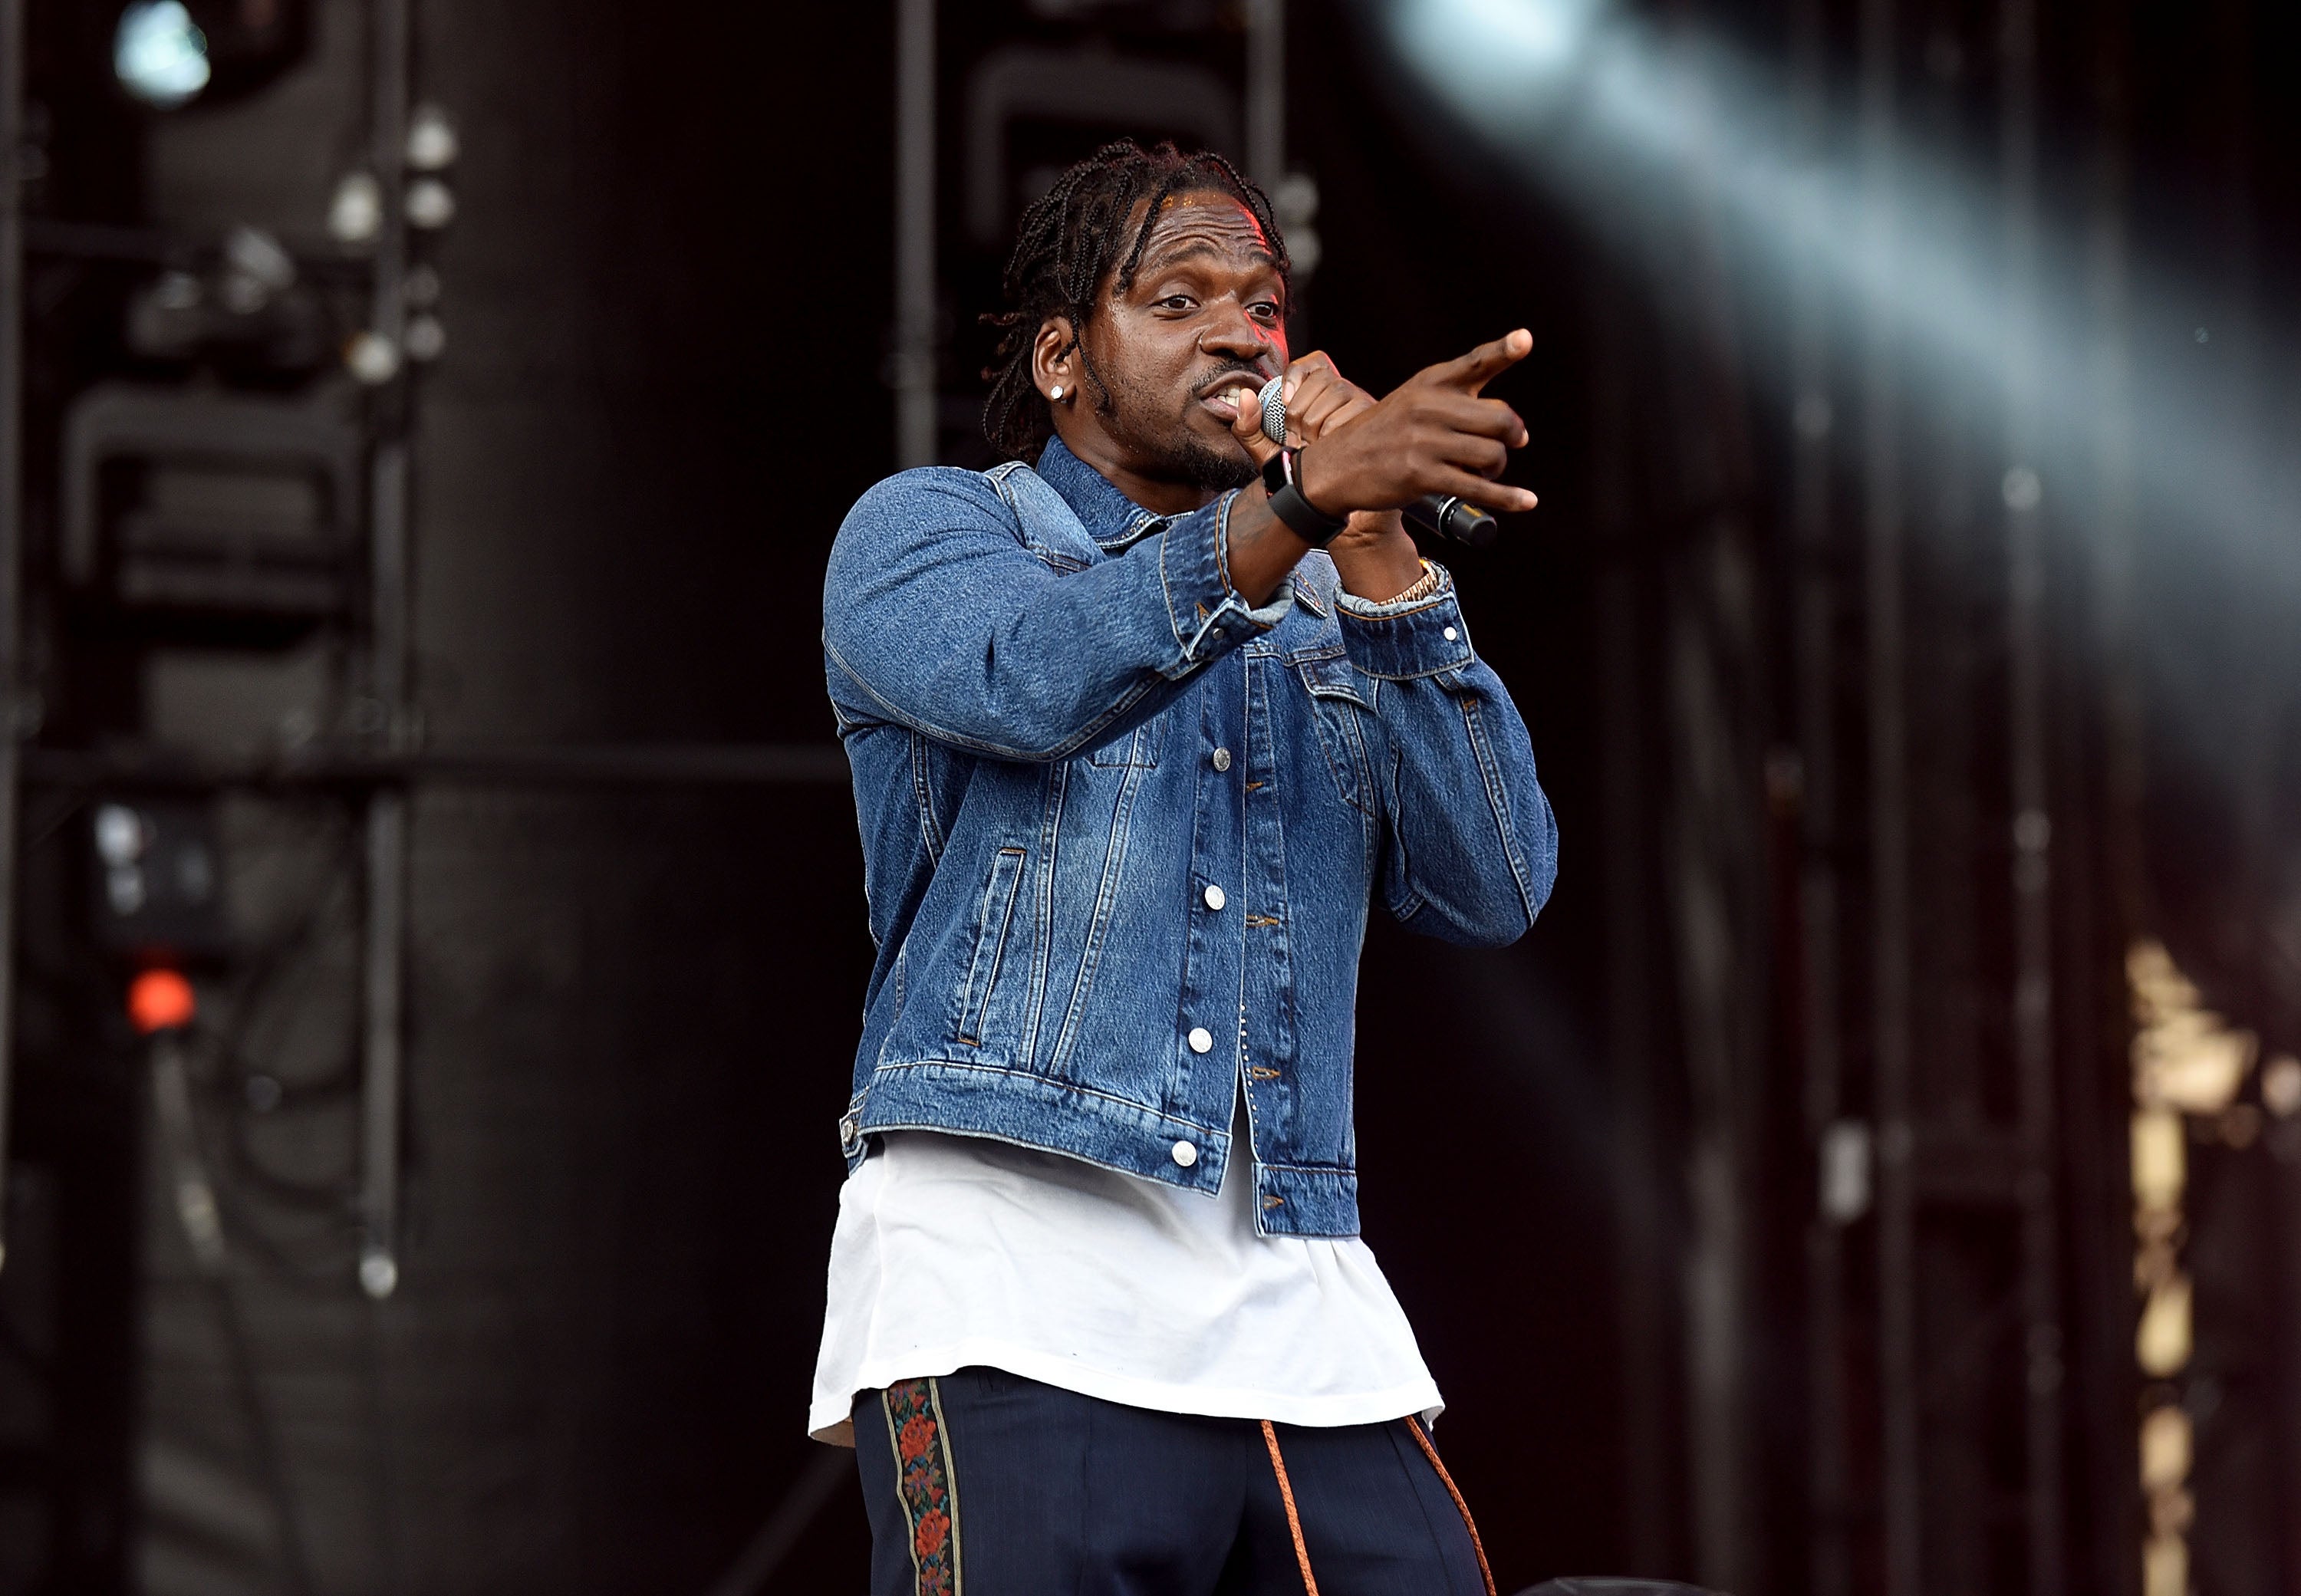 Pusha T Finishes Concert In Toronto After Drinks And Paint Tossed At Him